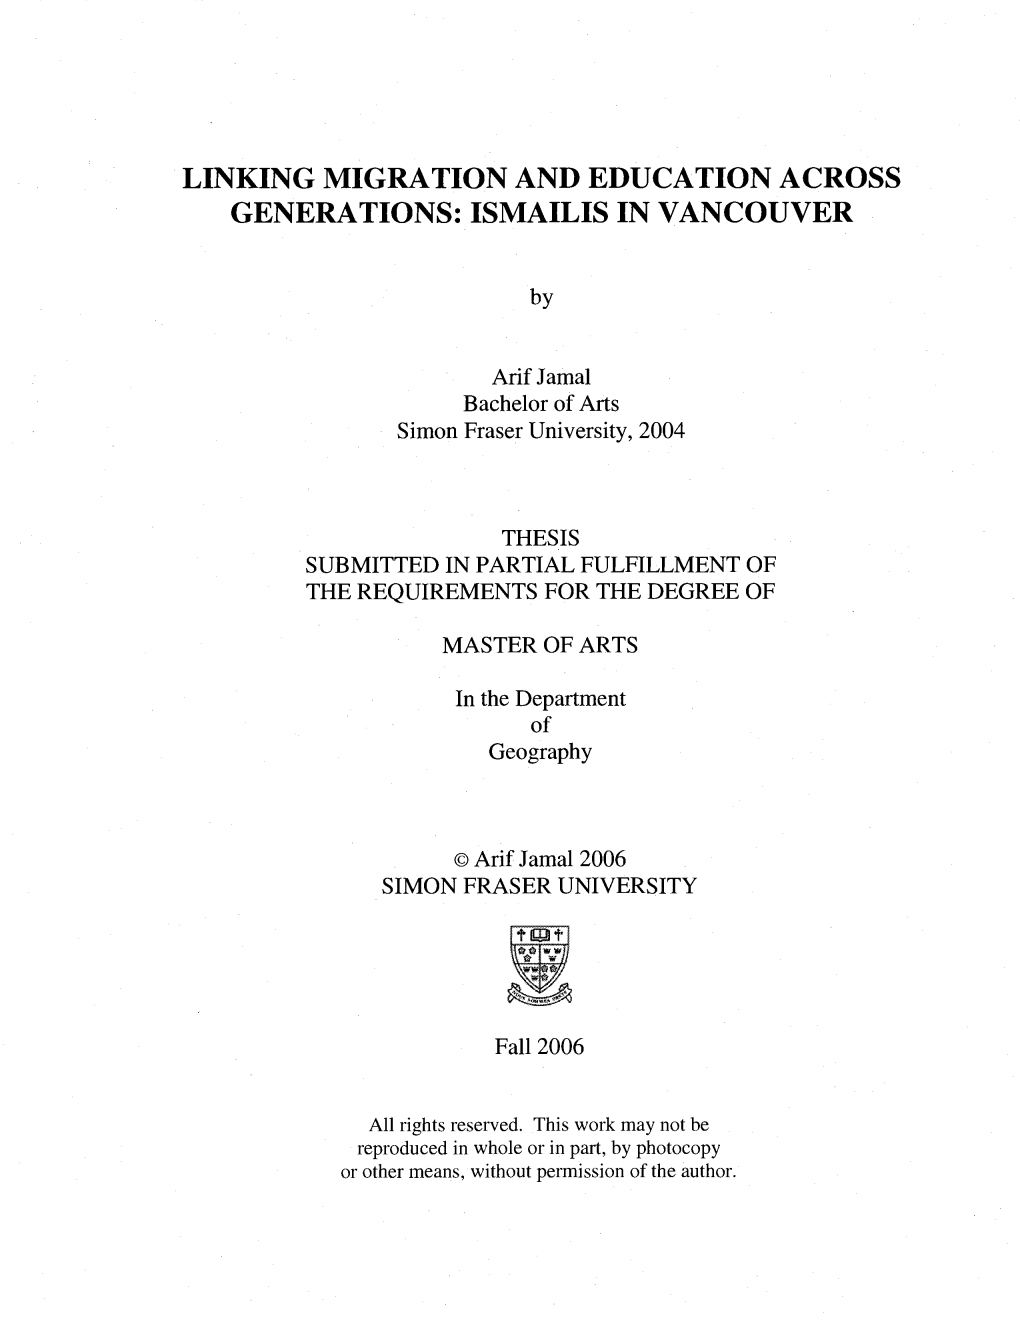 Linking Migration and Education Across Generations: Ismailis in Vancouver